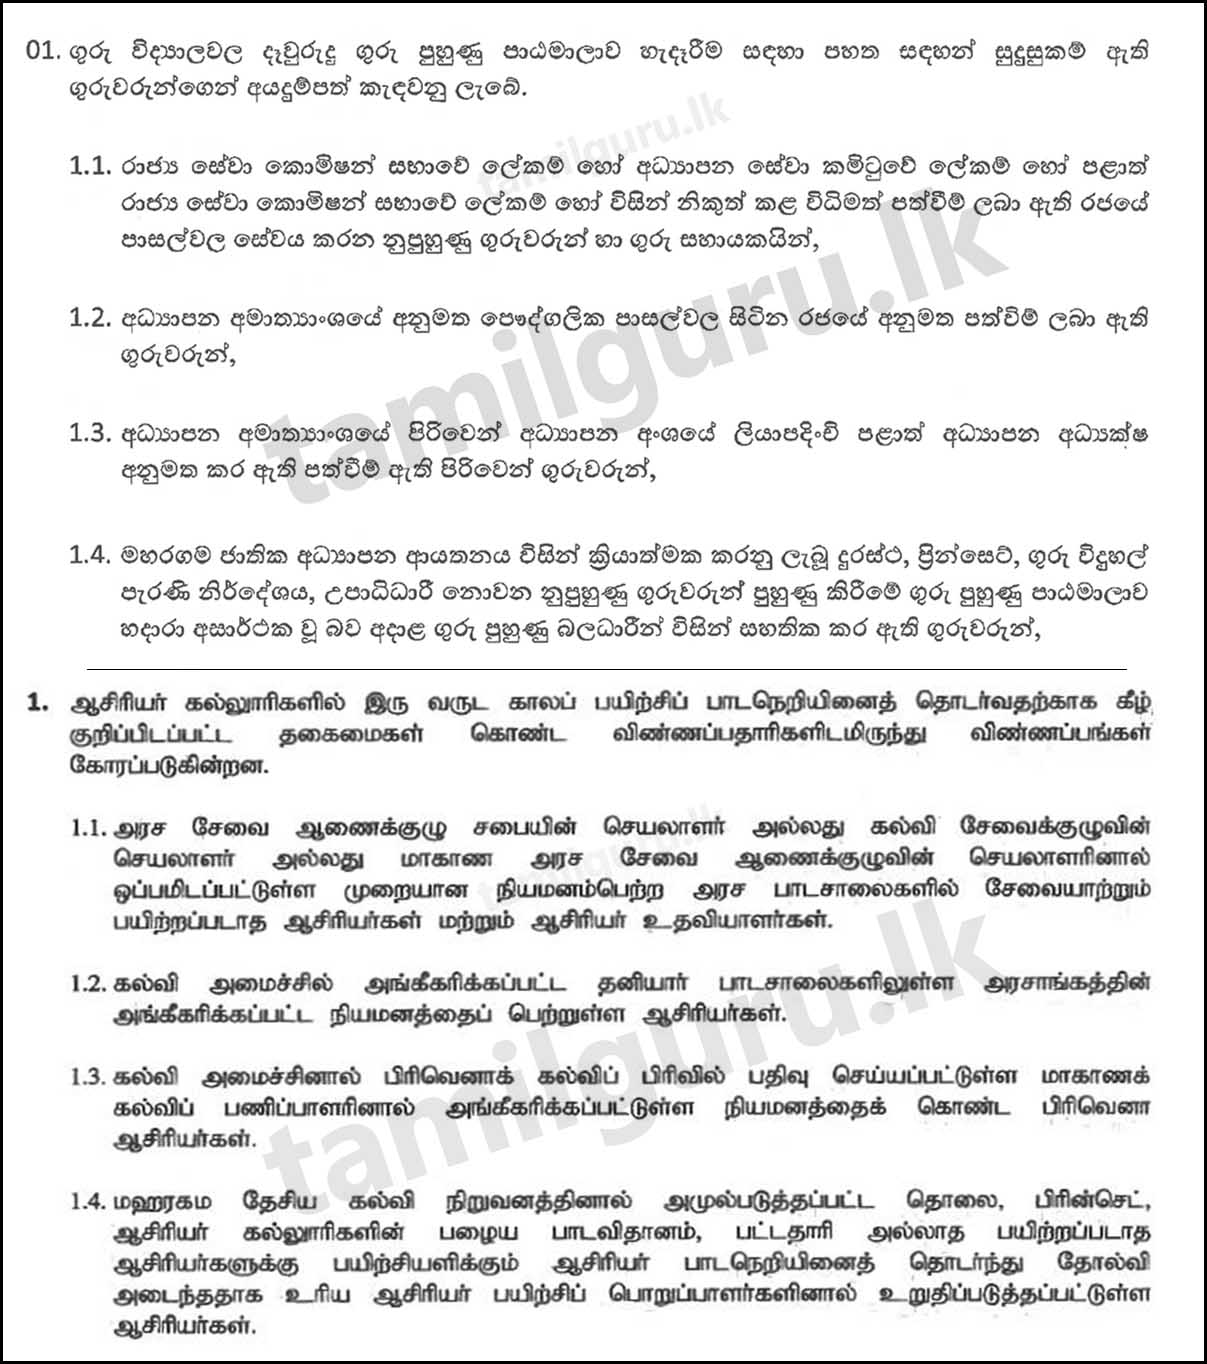 Admission for Teachers’ Training Colleges 2022/2023 (Training Courses) - Ministry of Education